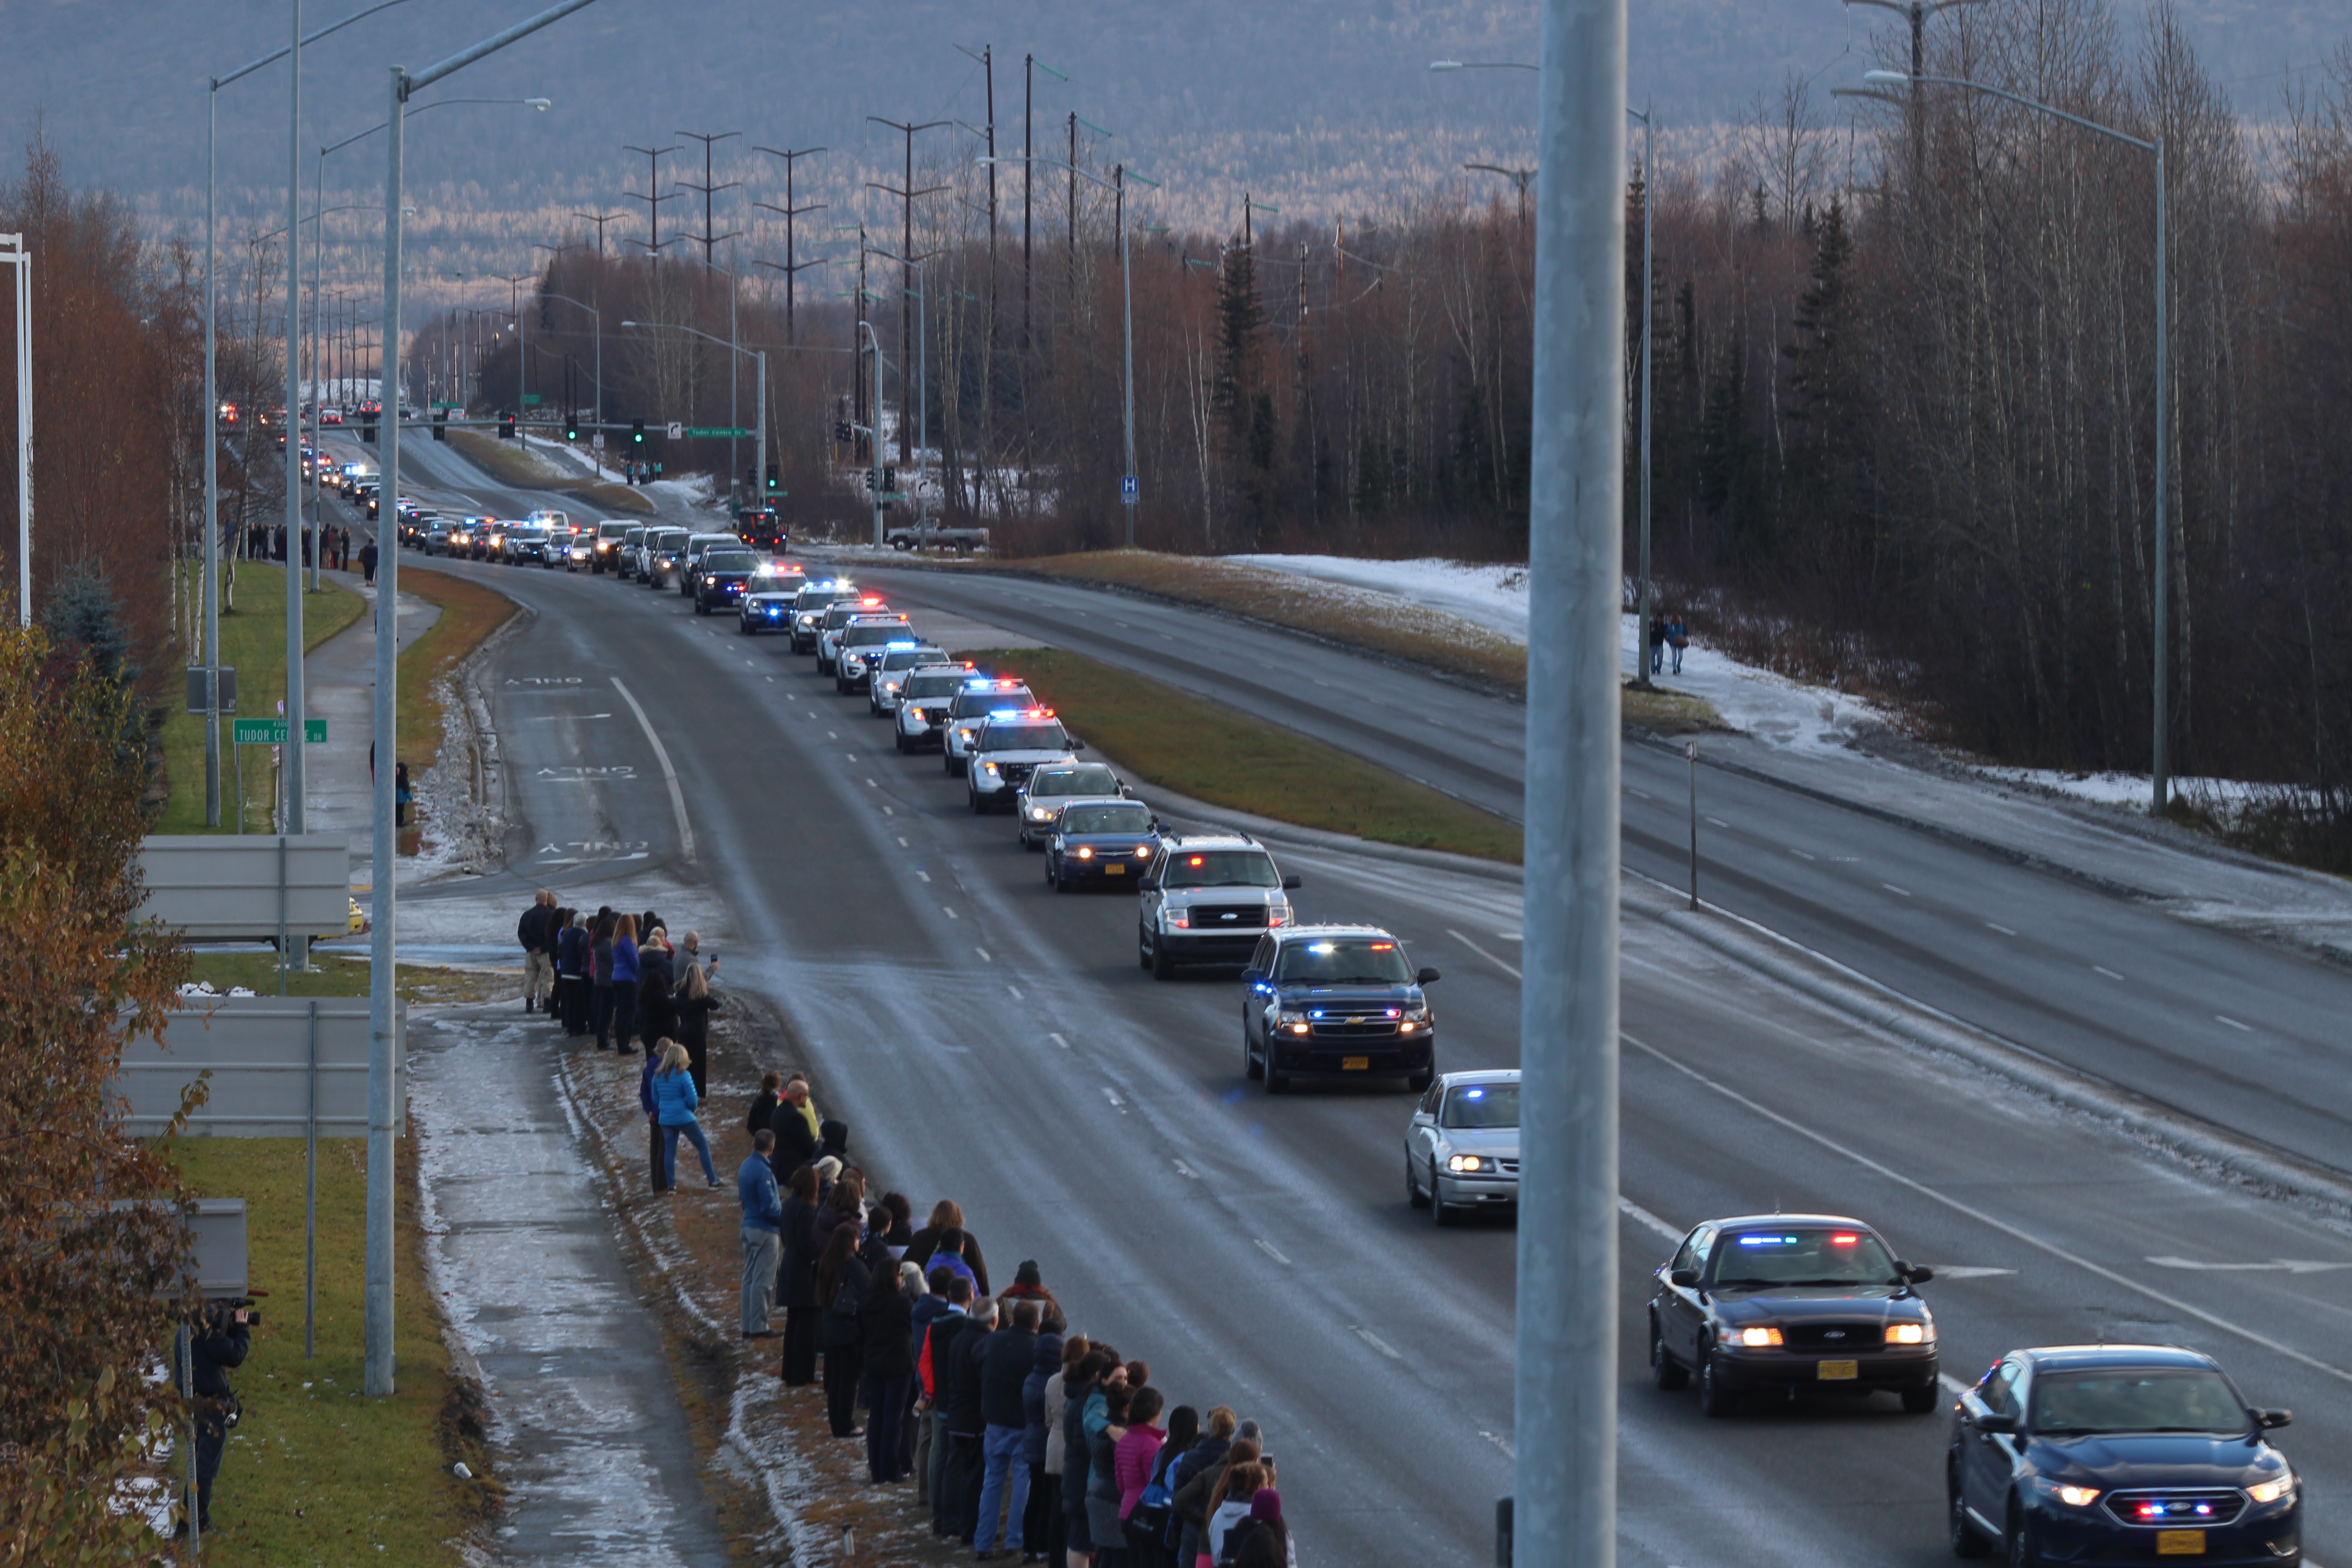 Anchorage citizens watch as a police escort brings FPD Sgt. Allen Brandt’s body to Ted Stevens International Airport for transport to Fairbanks (Photo by Wesley Early, Alaska Public Media – Anchorage)